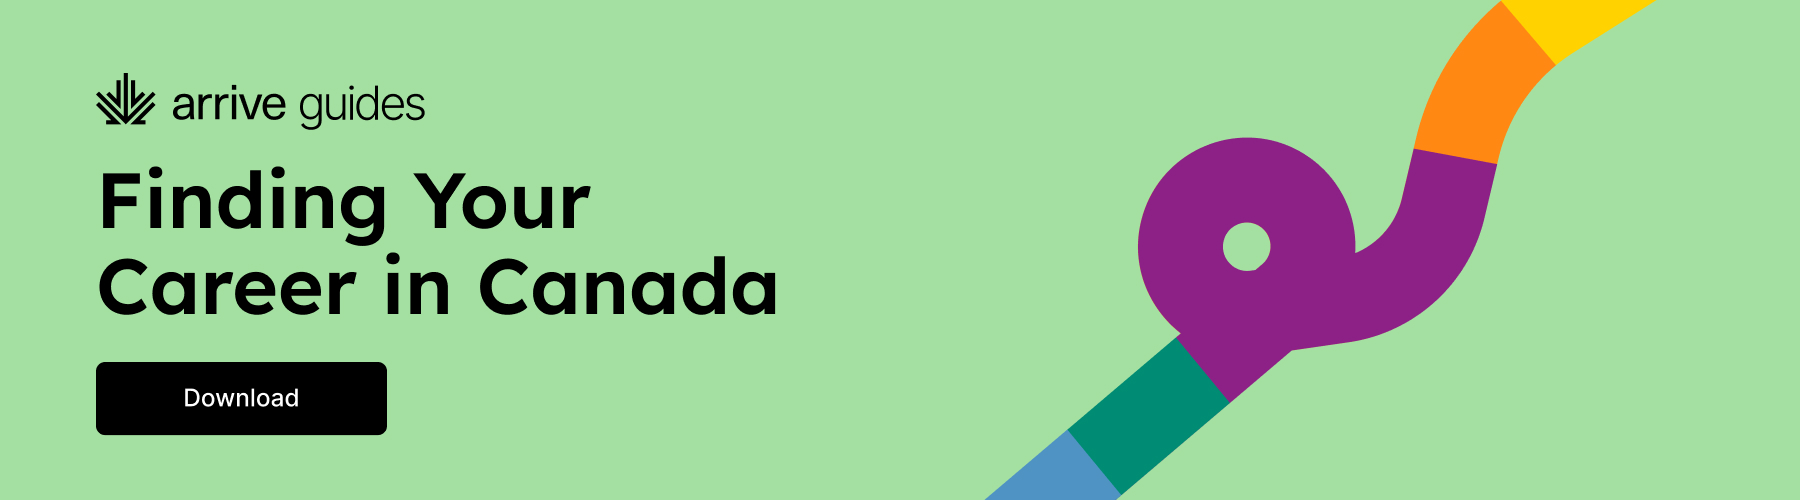 Download our free guide on finding your career in Canada